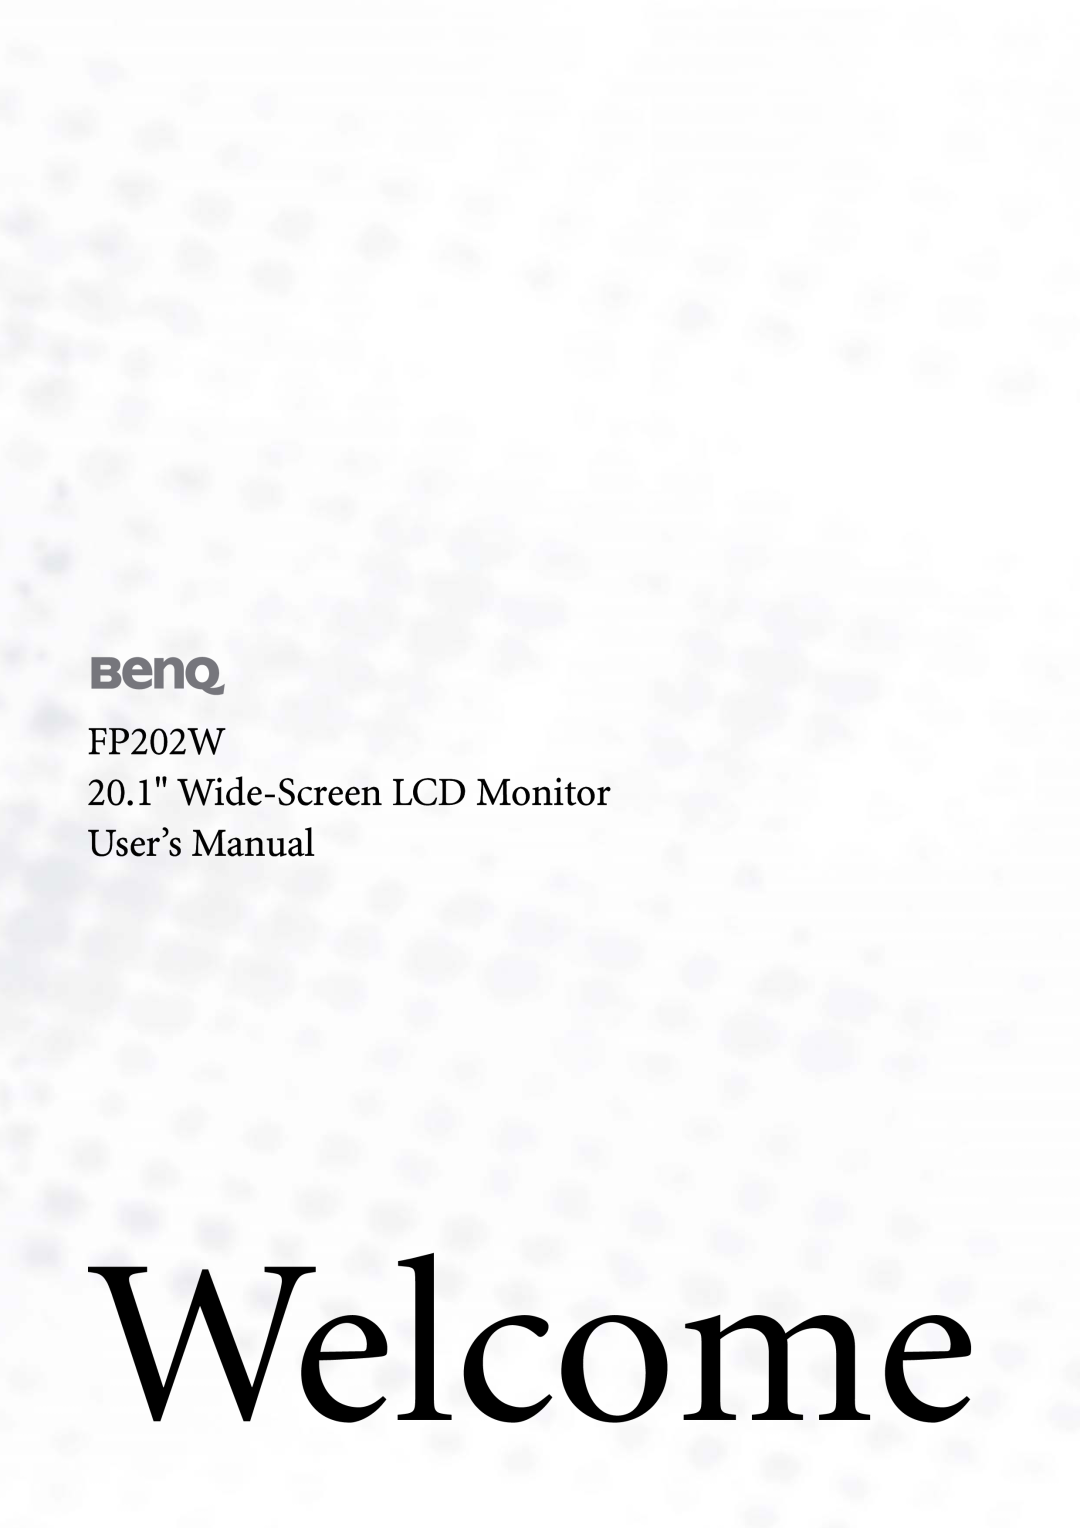 BenQ user manual Welcome, FP202W 20.1 Wide-Screen LCD Monitor User’s Manual 